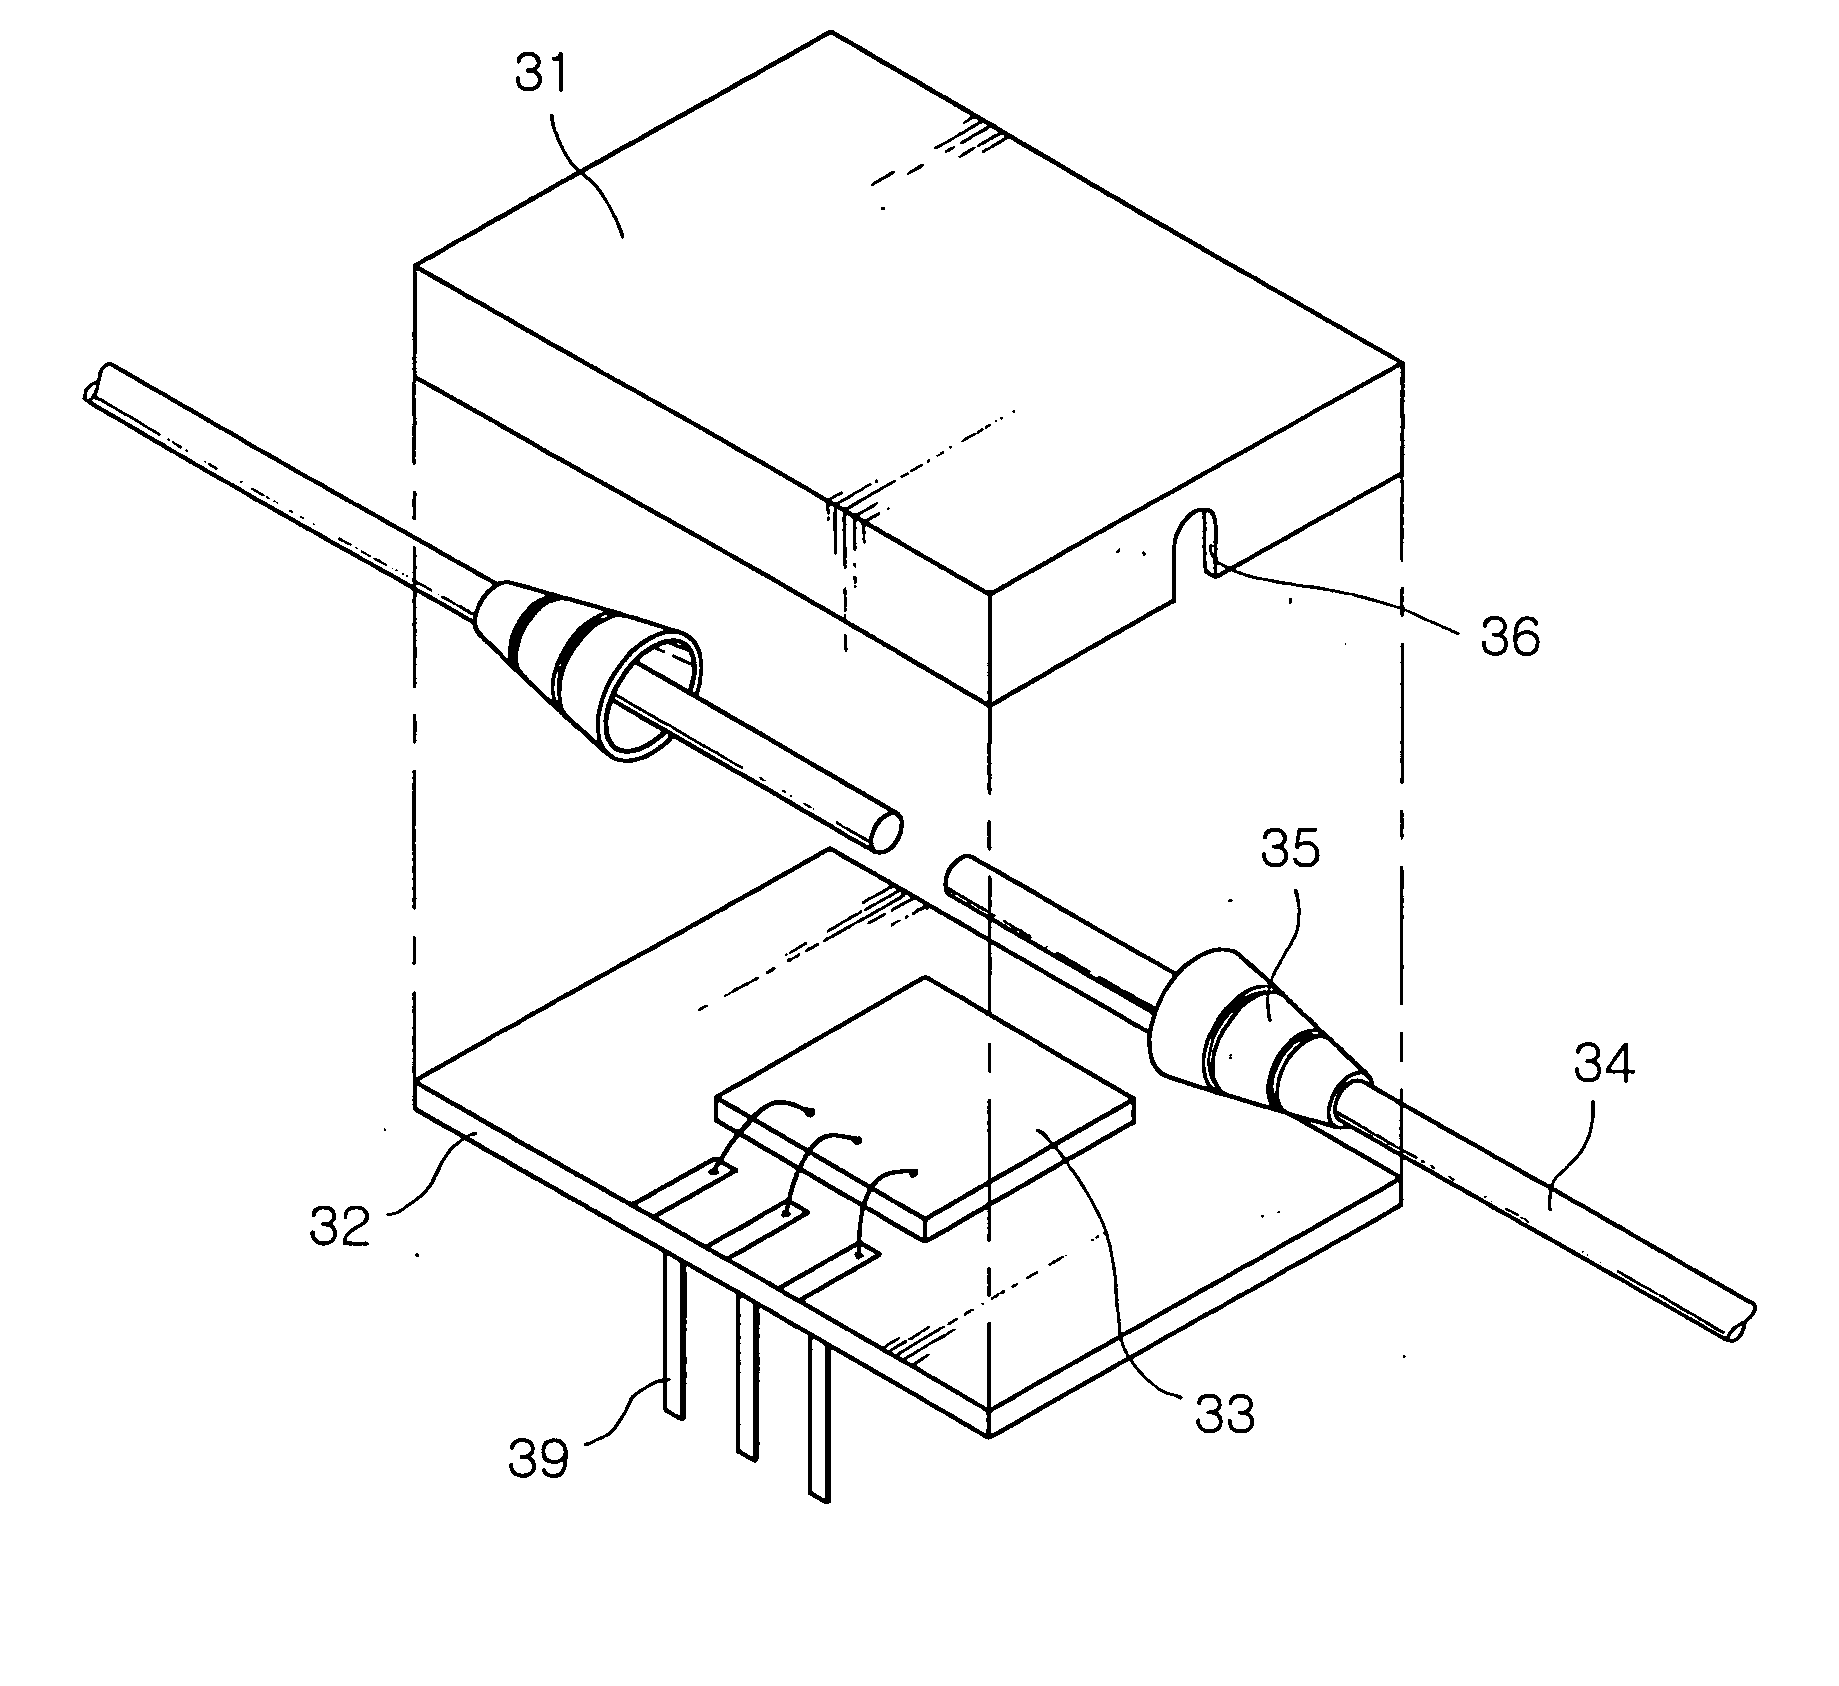 Micro optical communication device package